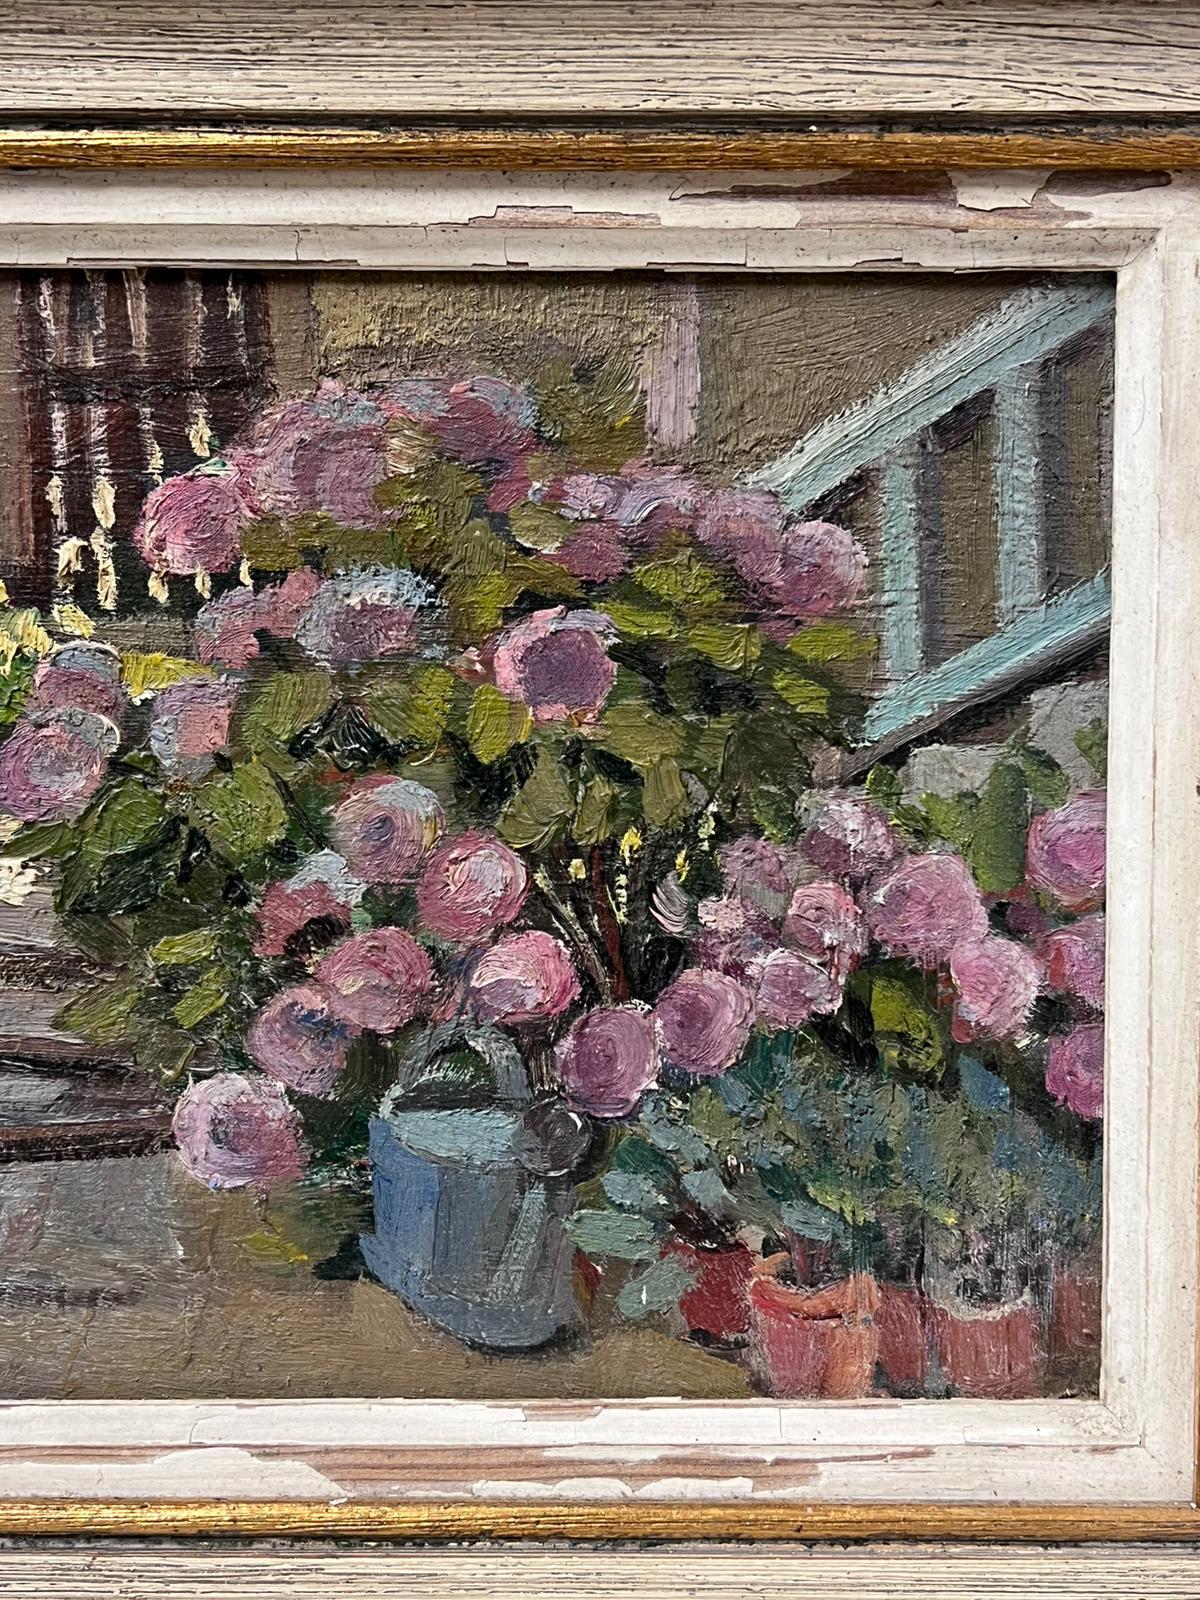 Mid 20th Century French Oil Painting The Cottage Garden Flowers by Steps & Pots - Gray Landscape Painting by Louise Alix